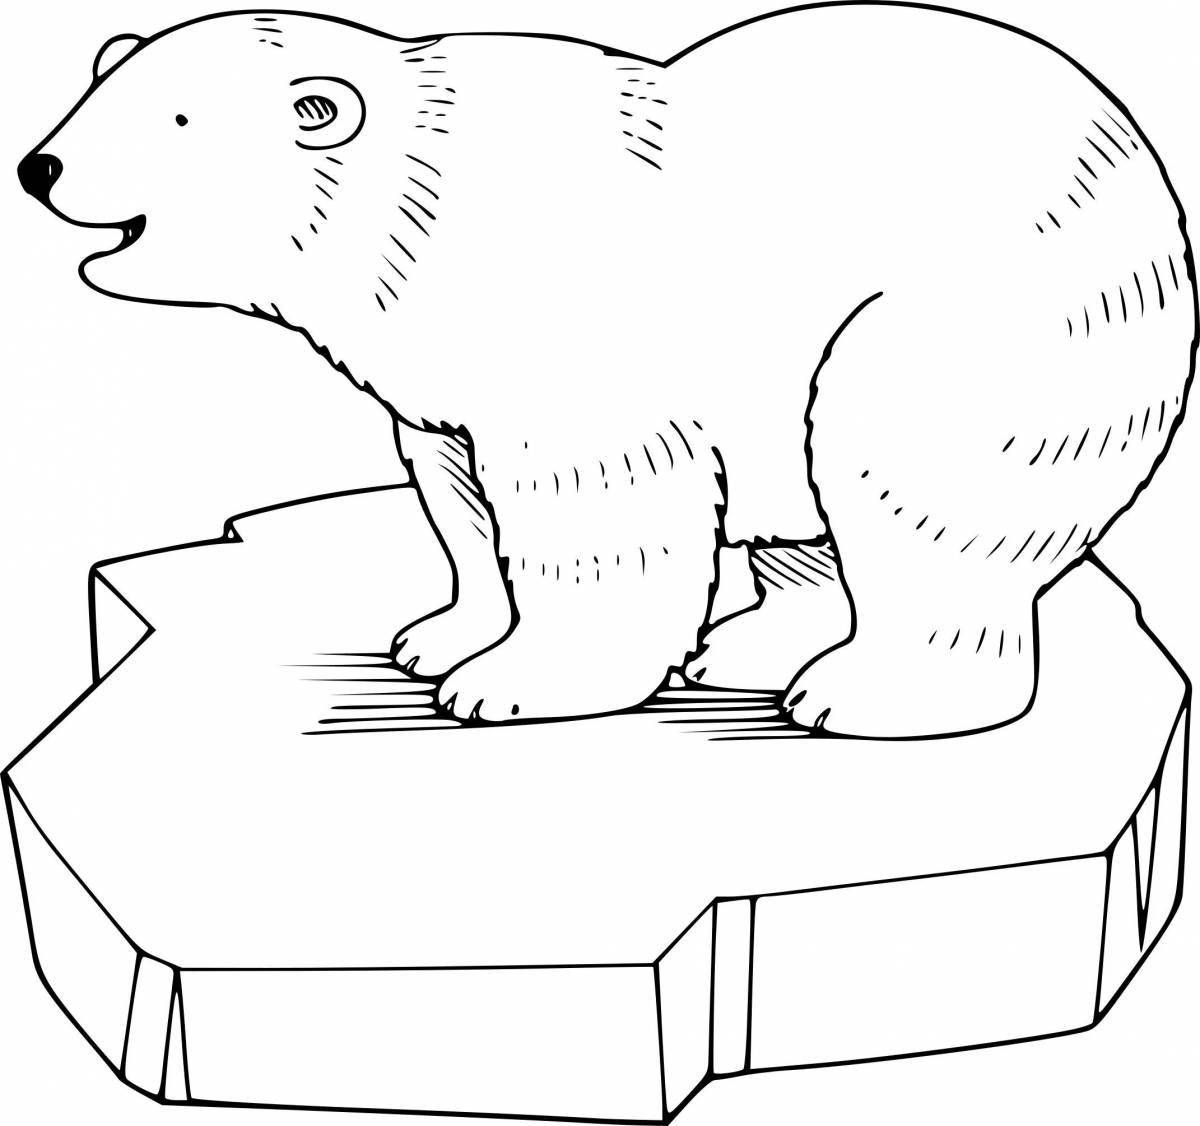 Exciting polar bear coloring book for kids